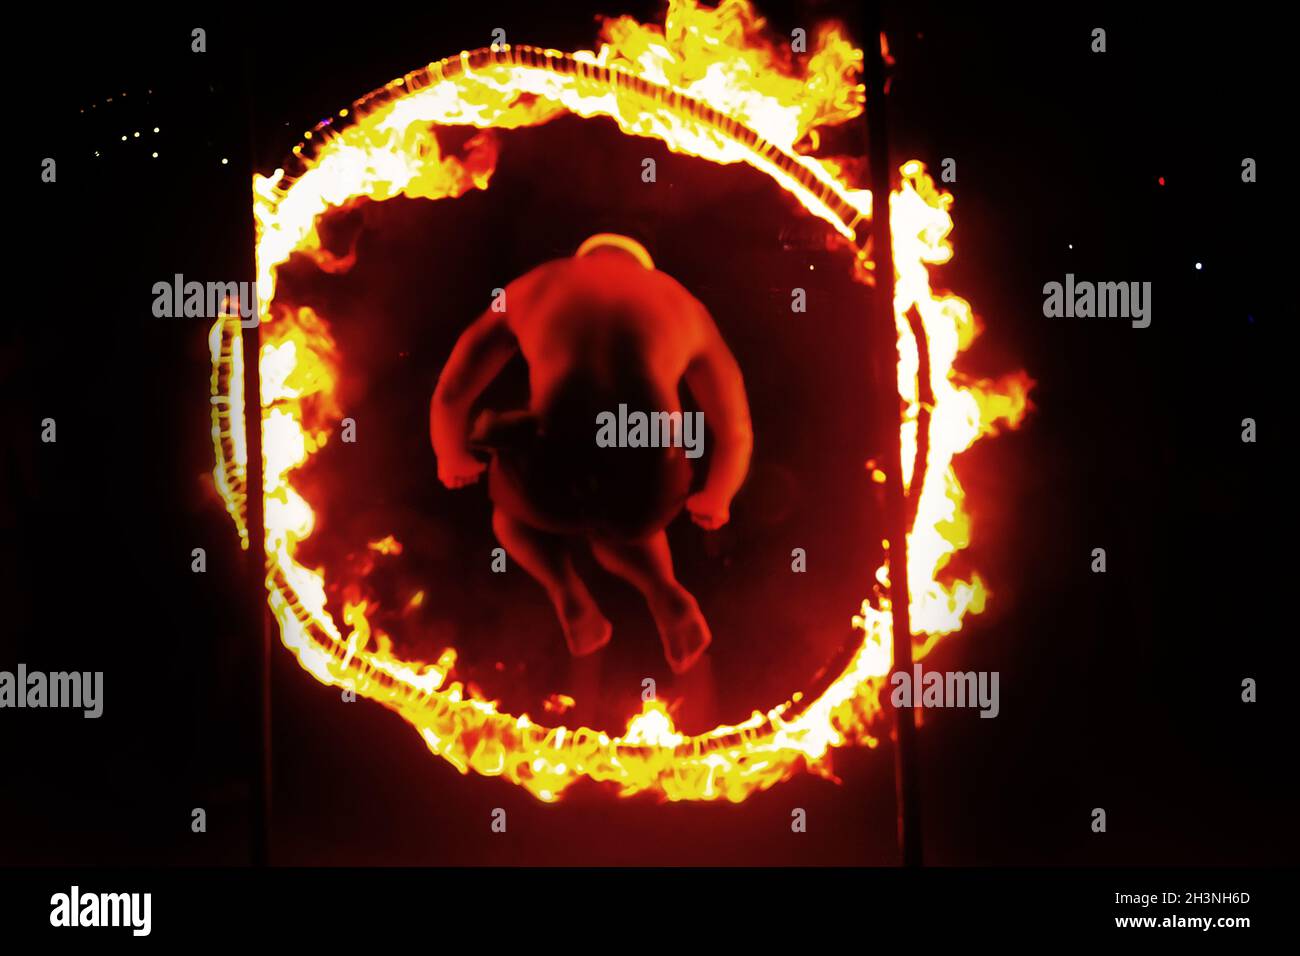 A man passes in a circle of fire Stock Photo